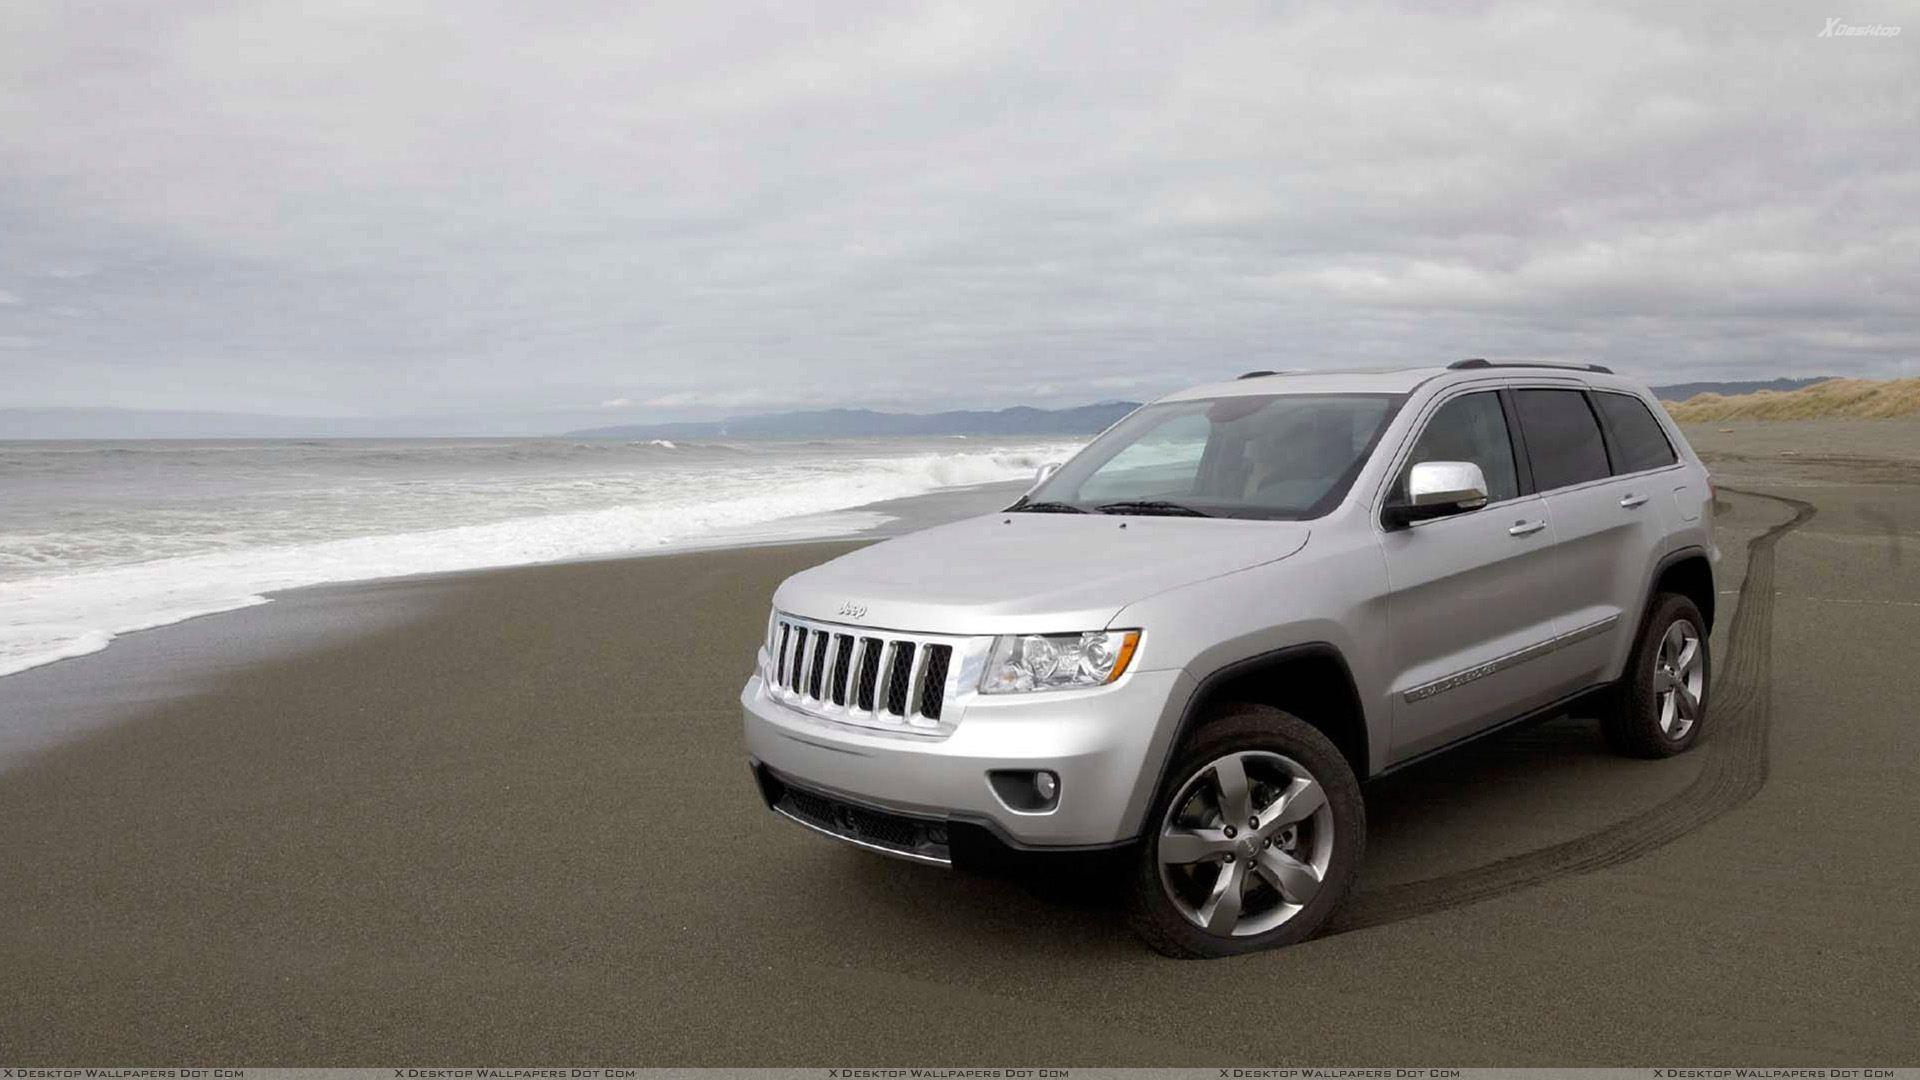 Jeep Grand Cherokee Pose At Sea Side In Shine White Wallpapers